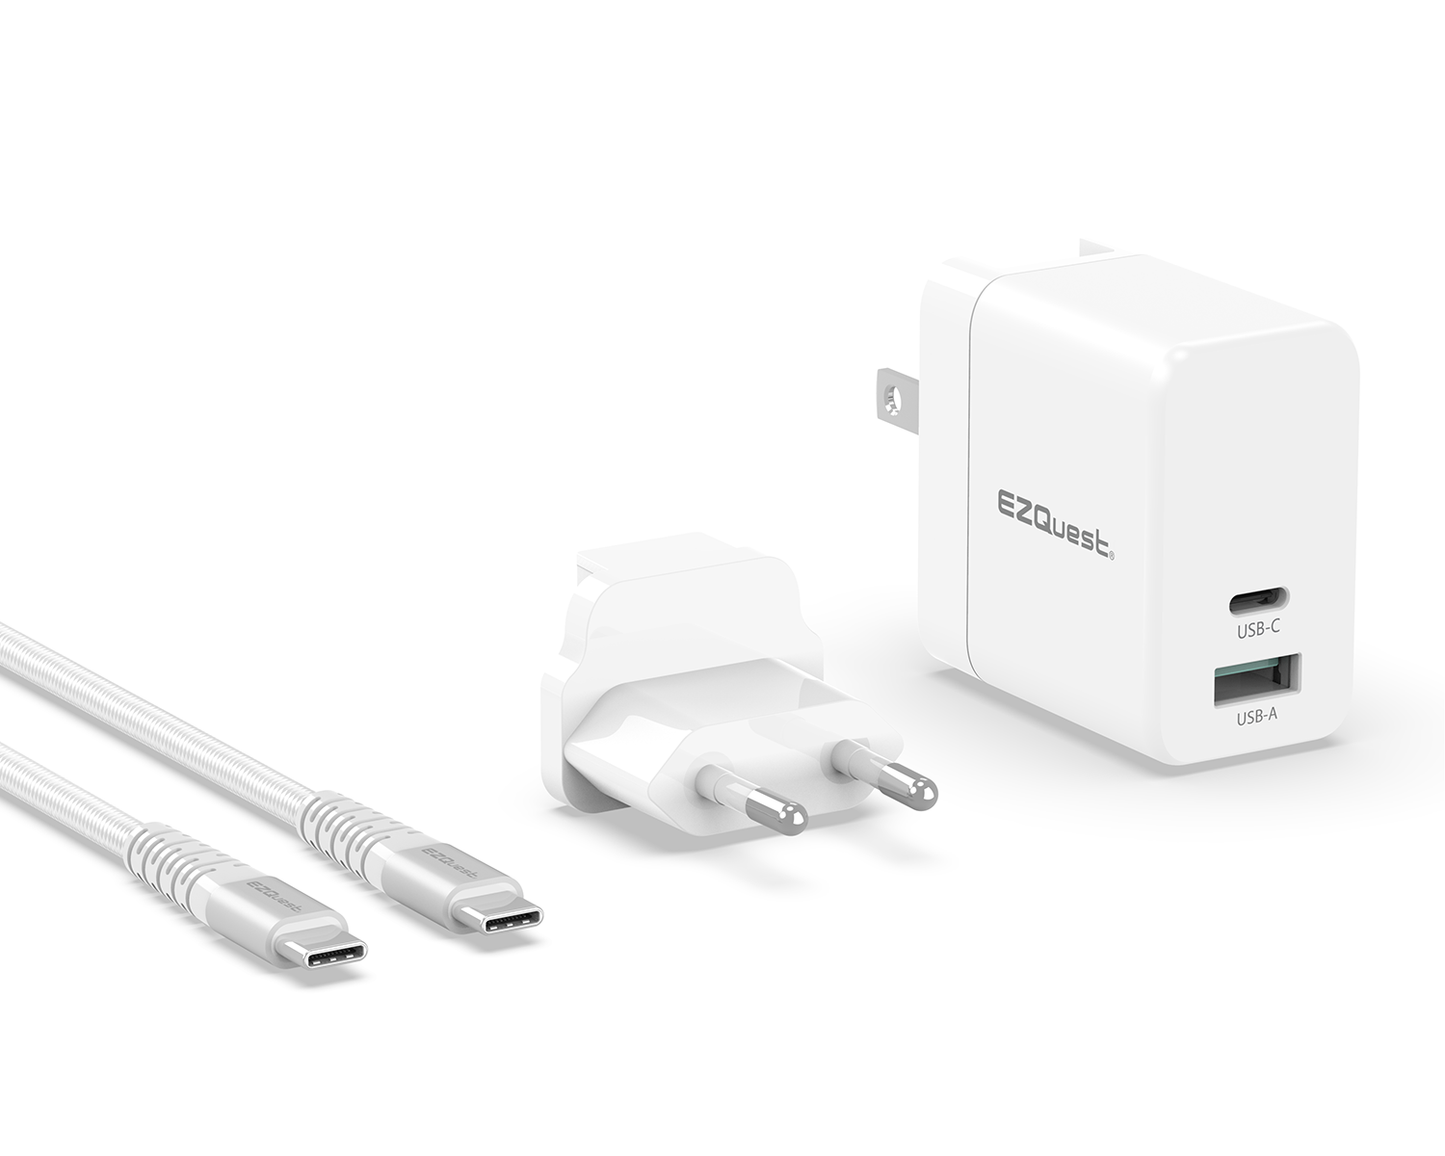 EZQuest UltimatePower 65W GaN USB-C PD Wall Charger - White